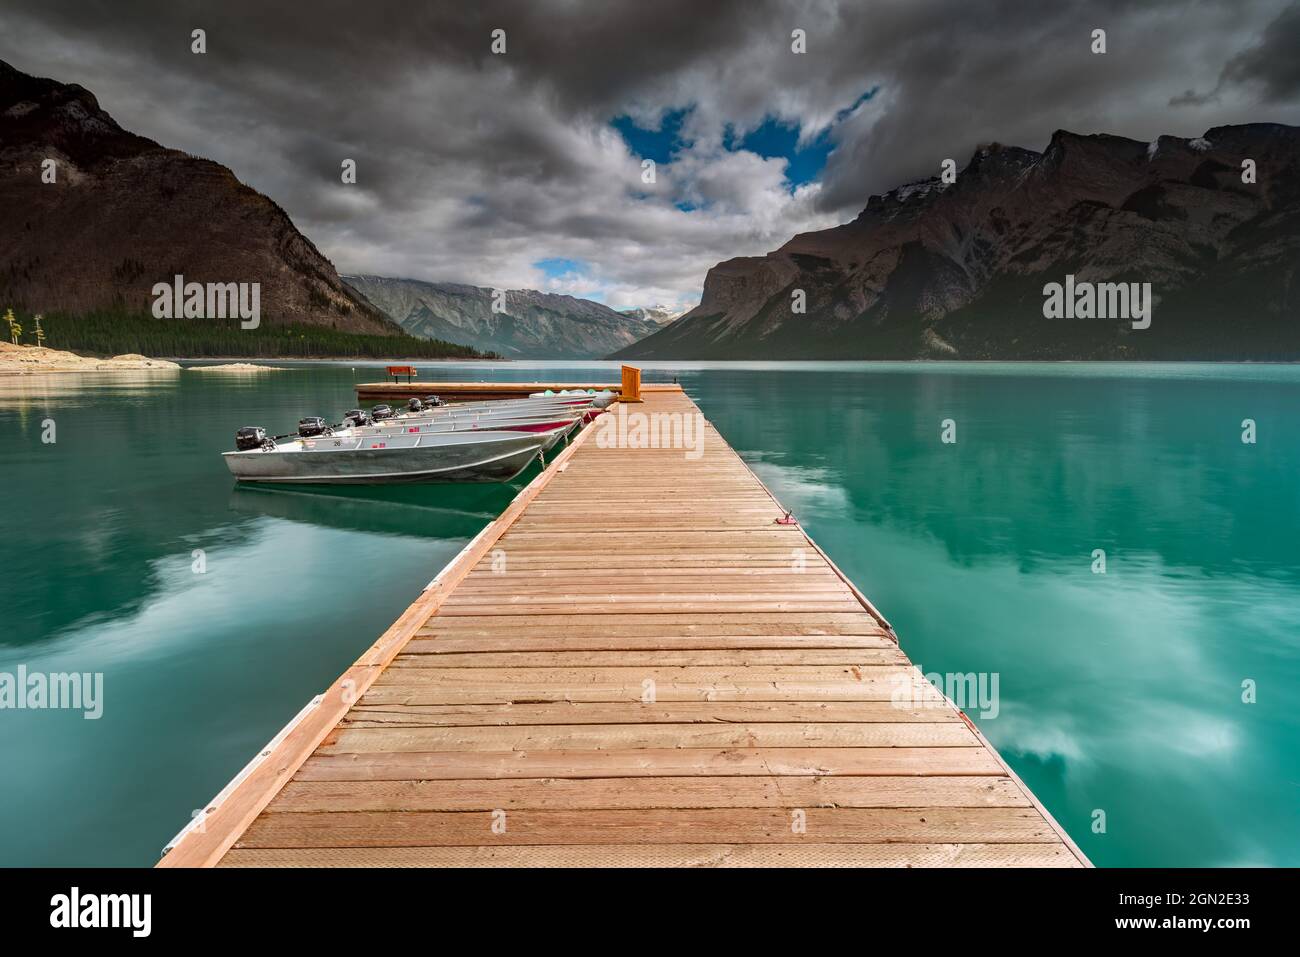 CANADA, ALBERTA, BANFF PARK, LAKE MINNEWANKA. WOODEN PONTOON WITH MOTOR BOATS MOORED ON LAKE MINNEWANKA WITH MONT GIROUARD IN THE BACKGROUND UNDER A S Stock Photo